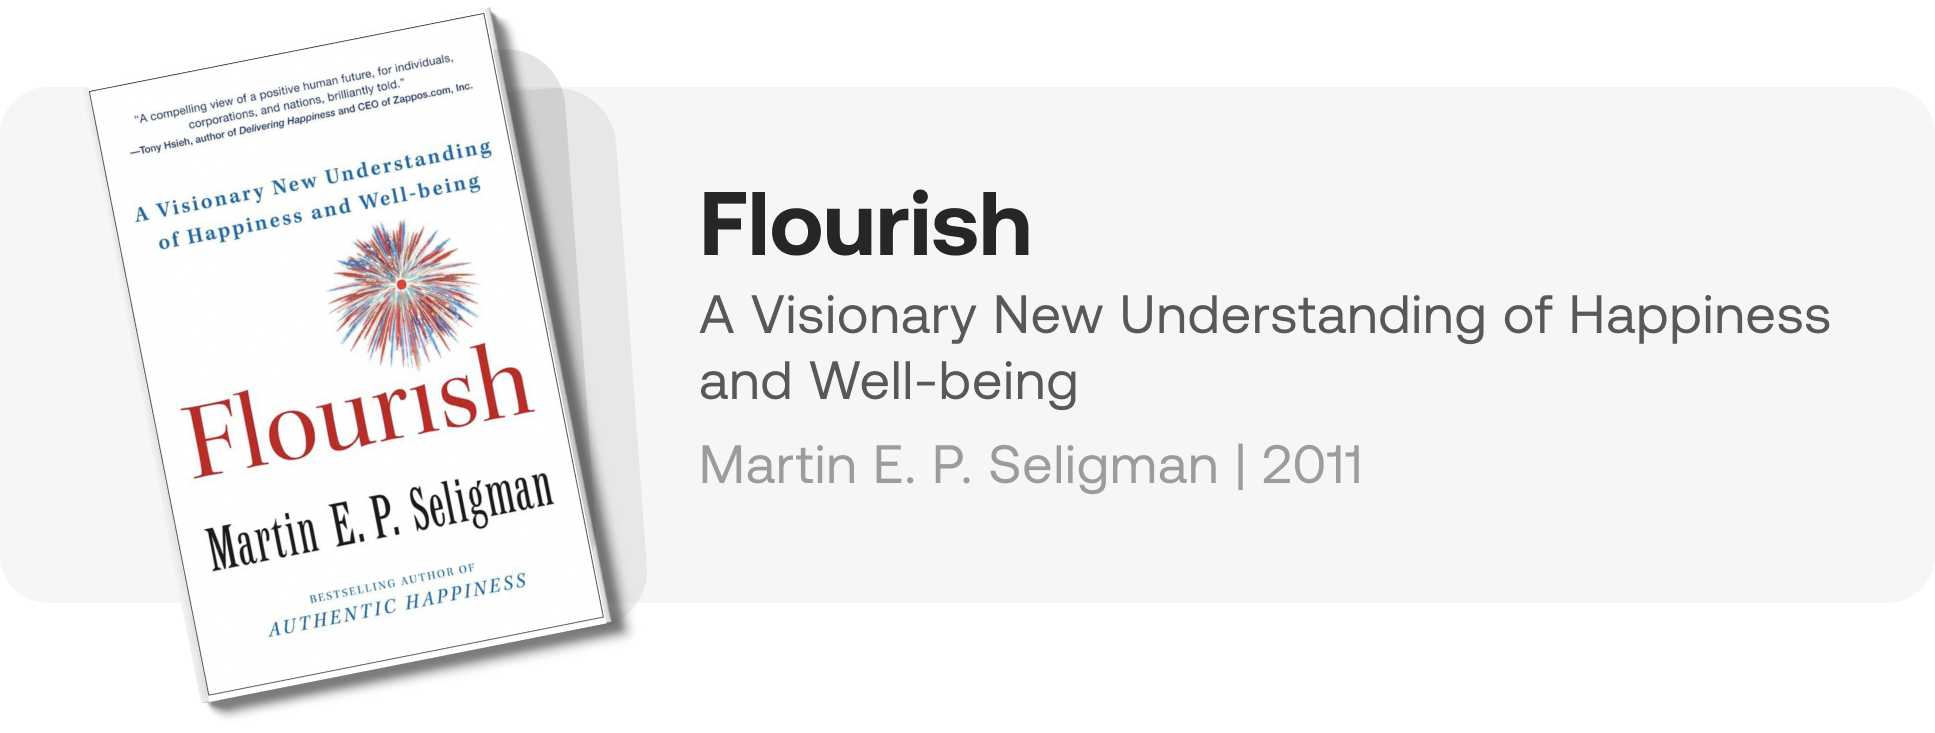 Flourish: A Visionary New Understanding of Happiness and Well-being by Martin E. P. Seligman